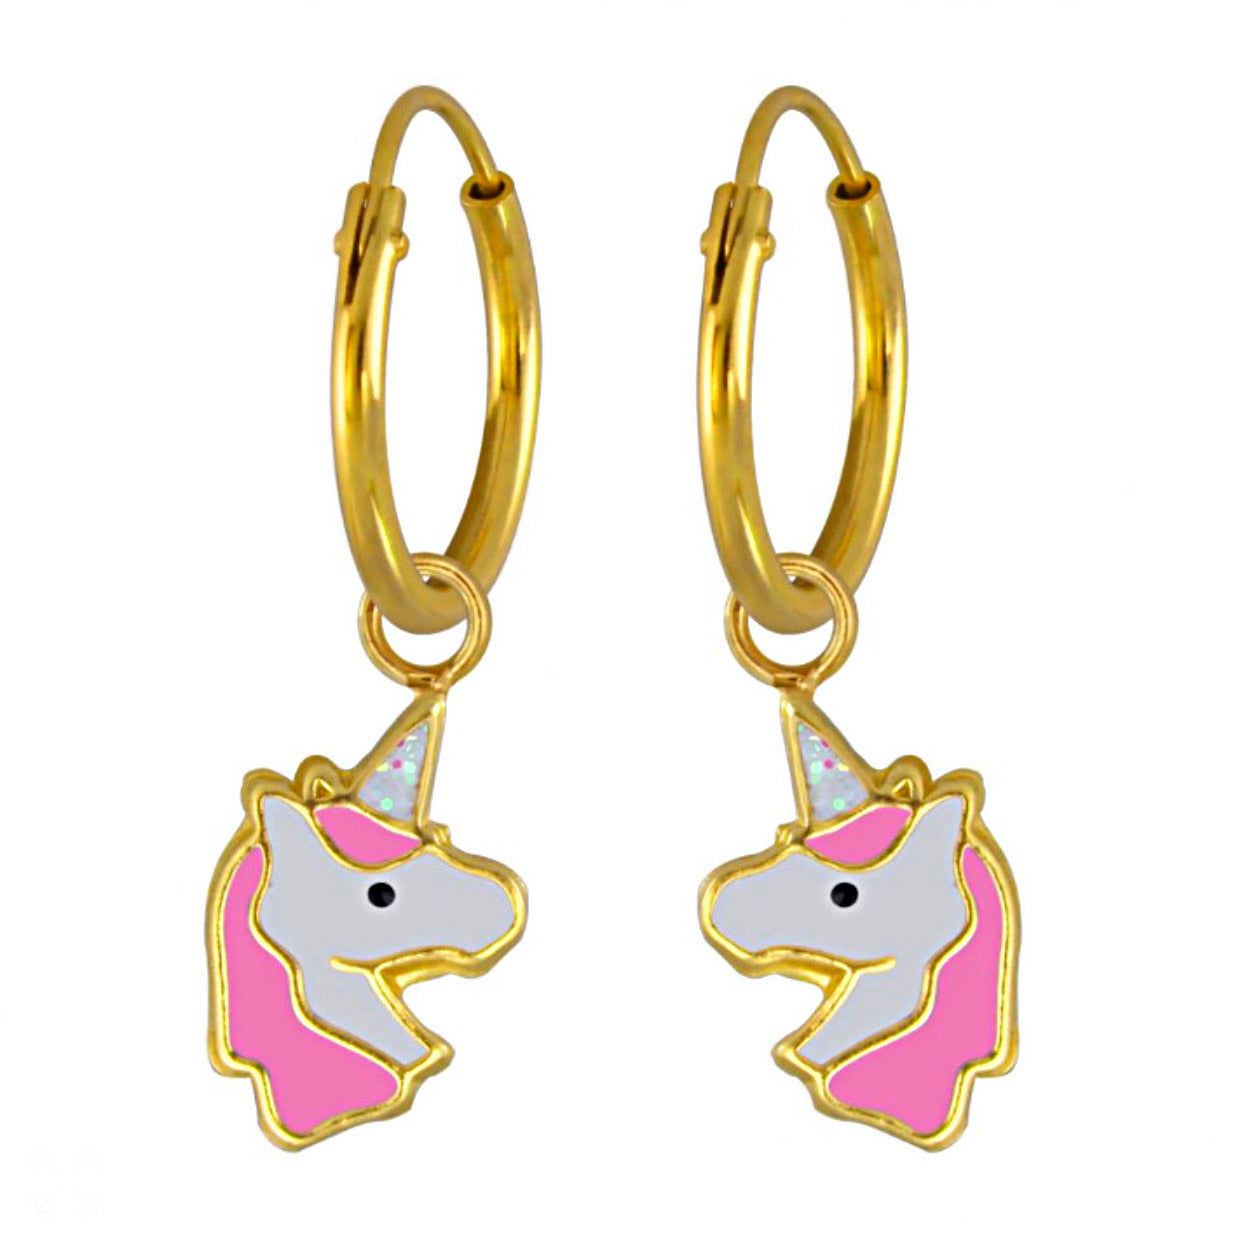 14K Gold Plated 925 Sterling Silver Pink Unicorn Hoop Earrings For Kids, Teens - Forever Kids Jewelry